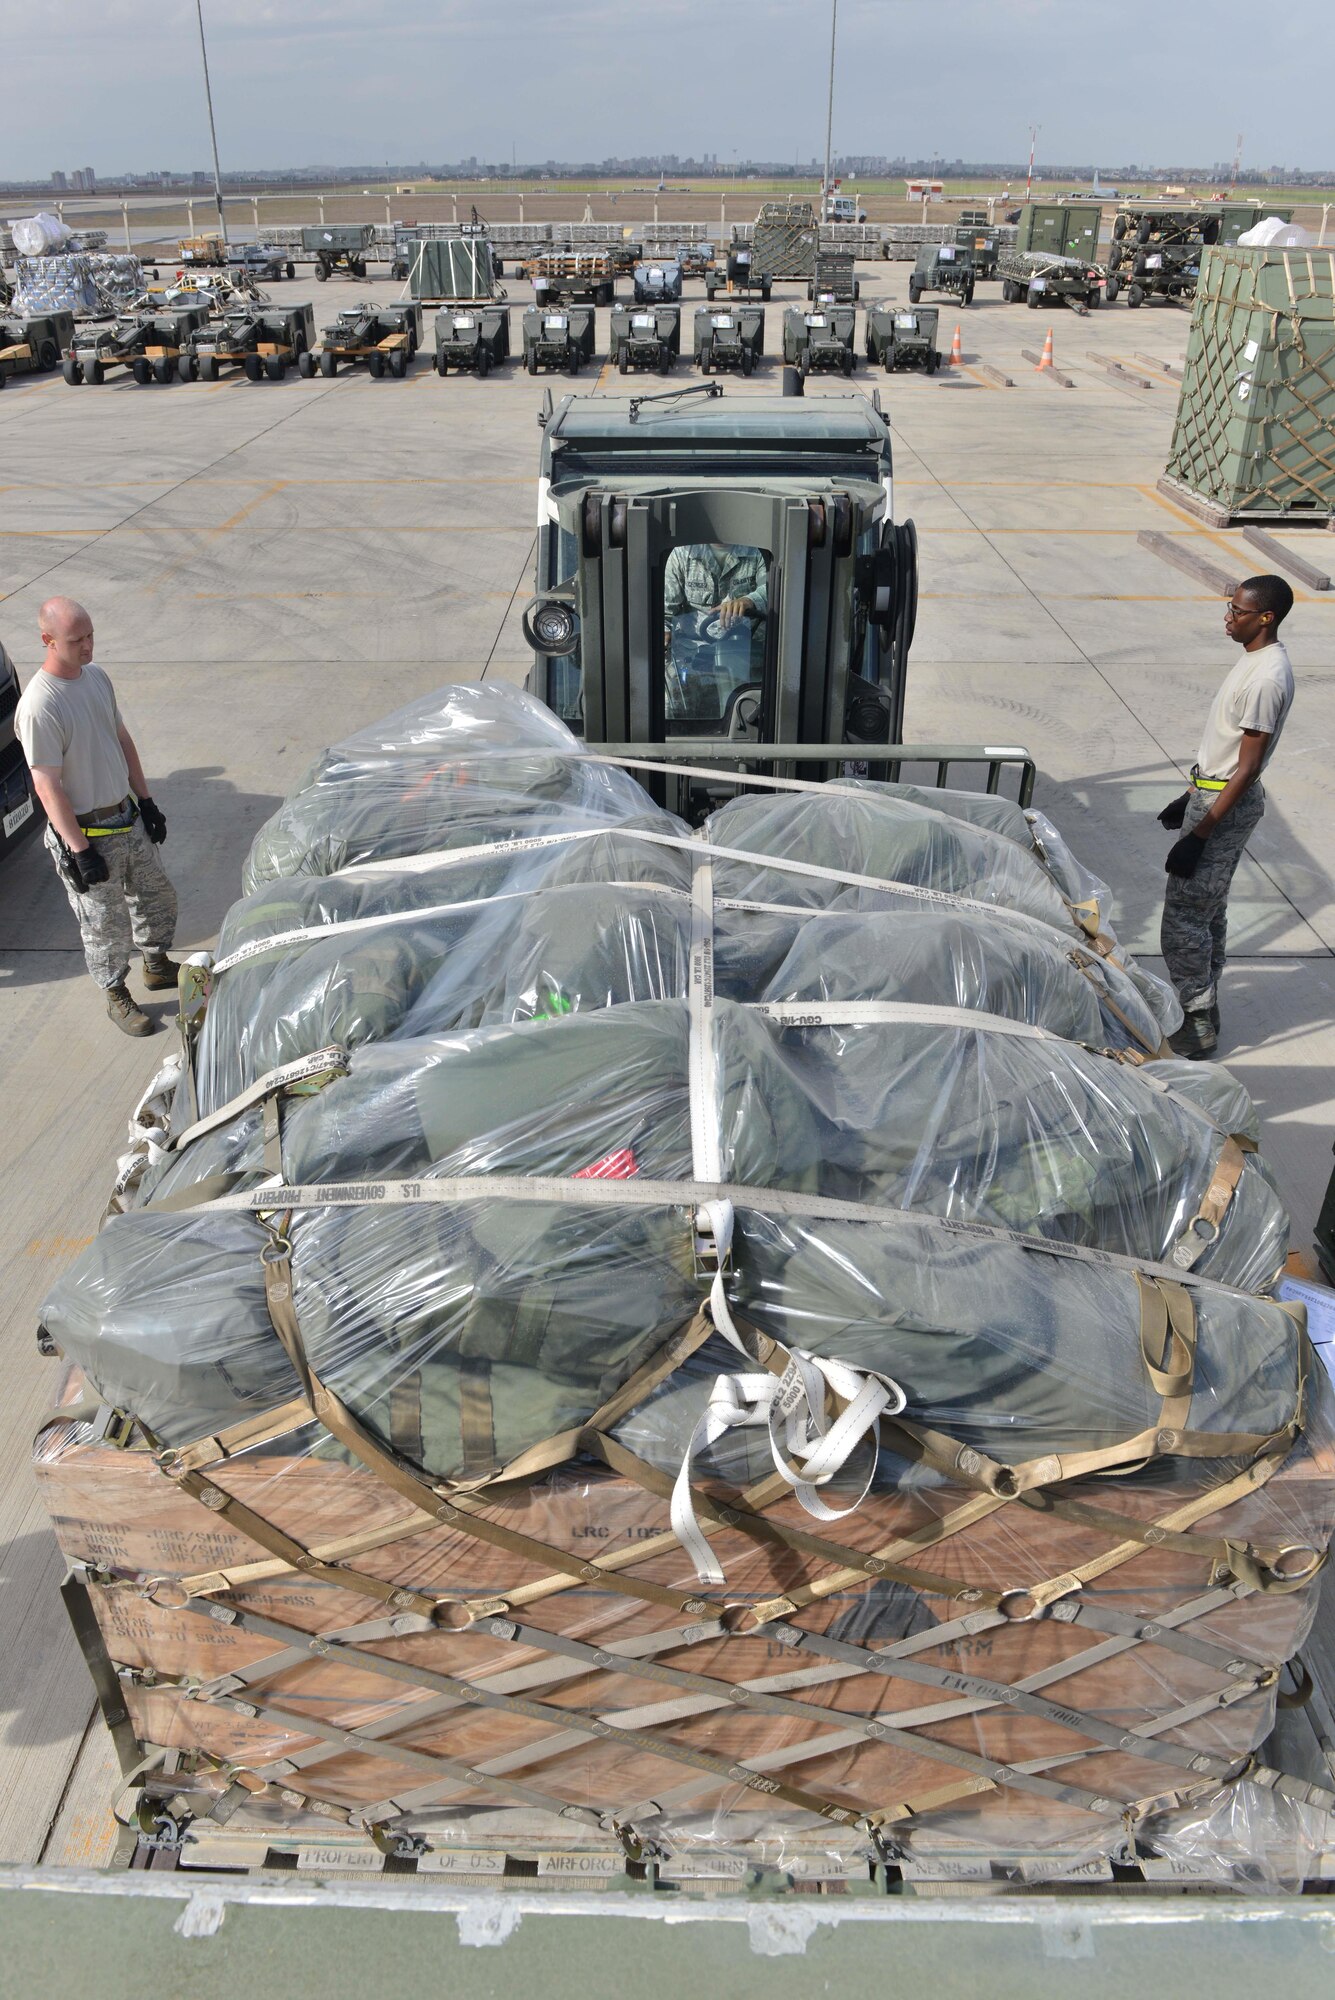 U.S. Airmen assigned to the 728th Air Mobility Squadron accomplish joint inspections on cargo Oct. 18, 2016, at Incirlik Air Base, Turkey. Joint inspections ensure a cargo’s air-worthiness prior to transportation. (U.S. Air Force photo by Senior Airman John Nieves Camacho)